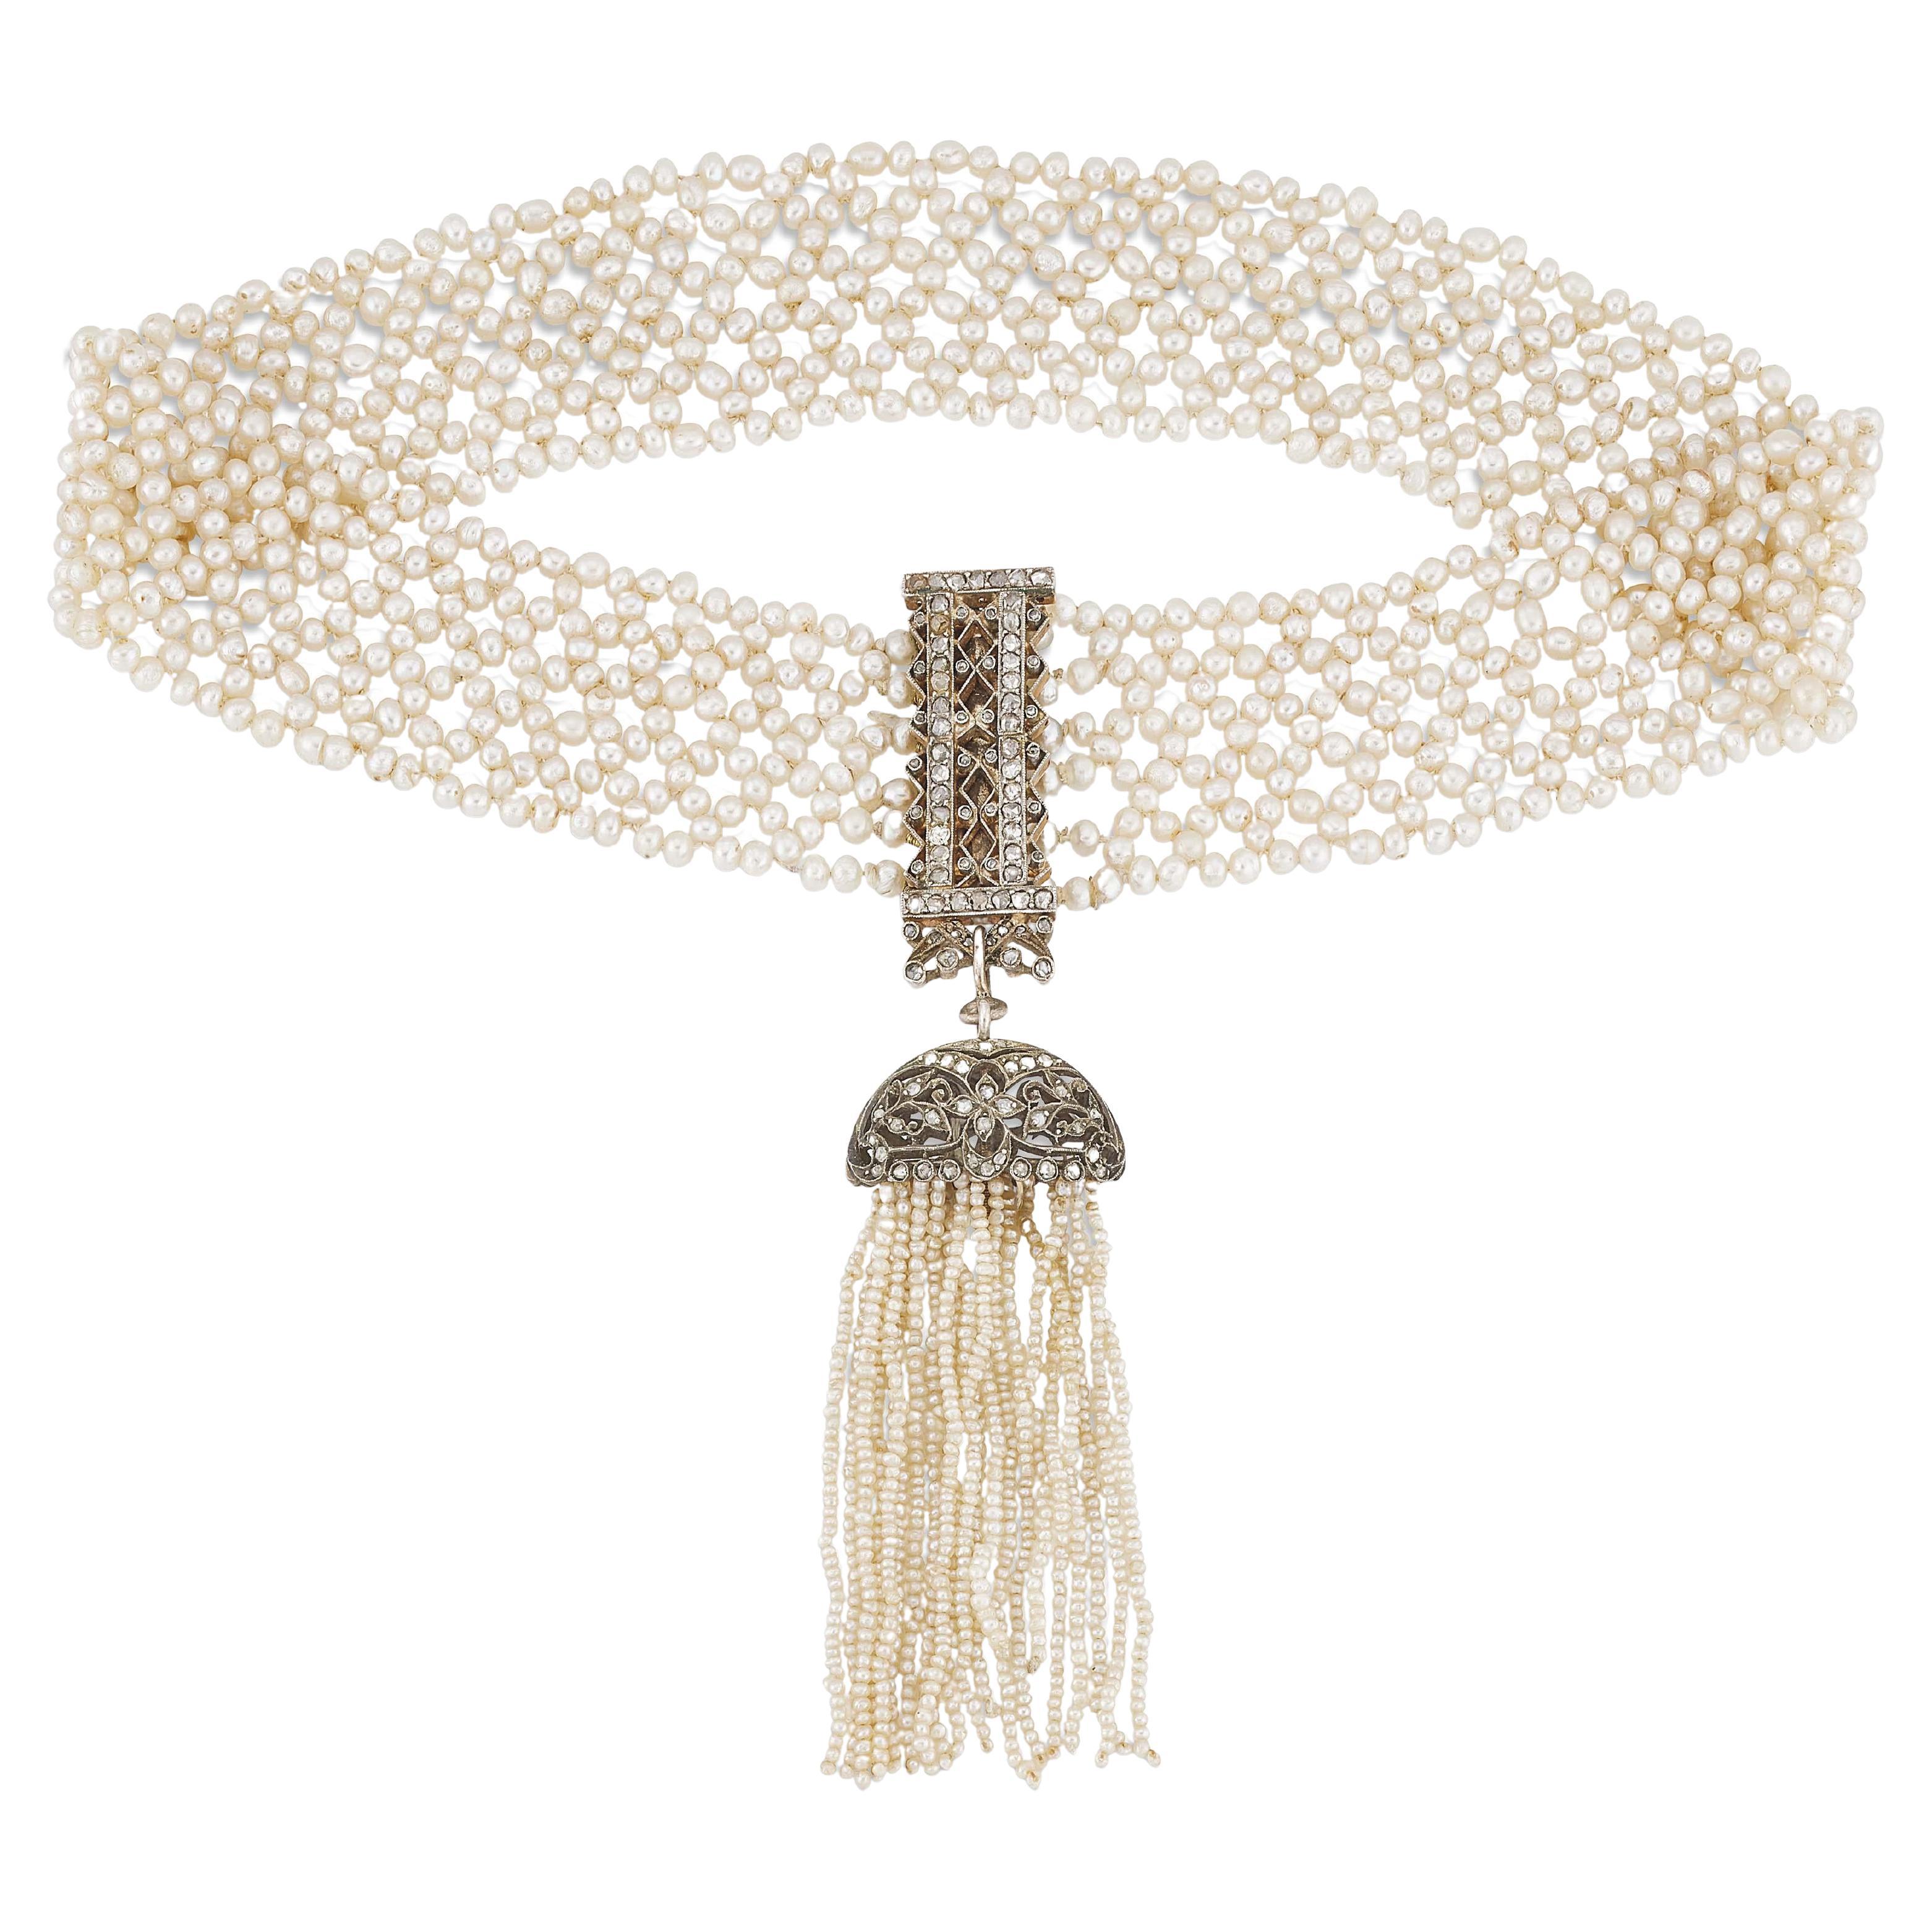 Belle Epoqué Diamond and Seed Pearl Choker French, circa 1910